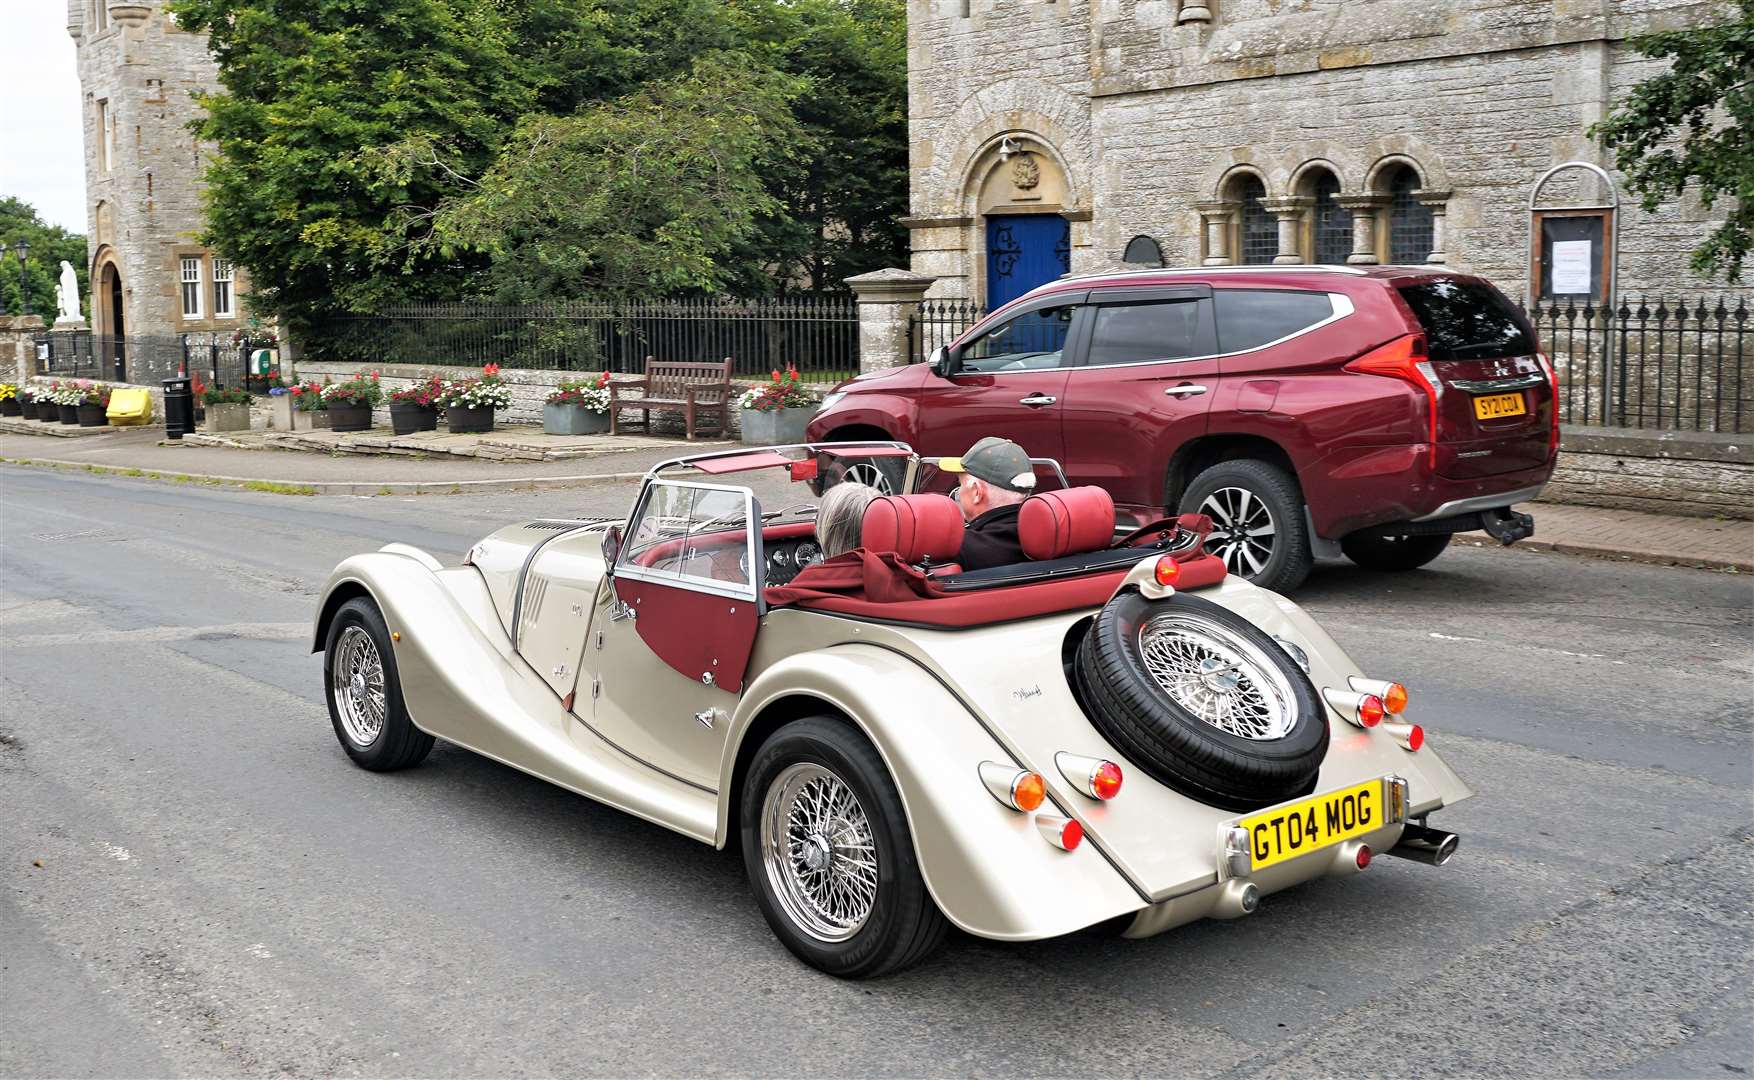 Ian and Elaine Grant drive away in their 2020 Morgan Plus 4 with bespoke trimmings. Picture: DGS